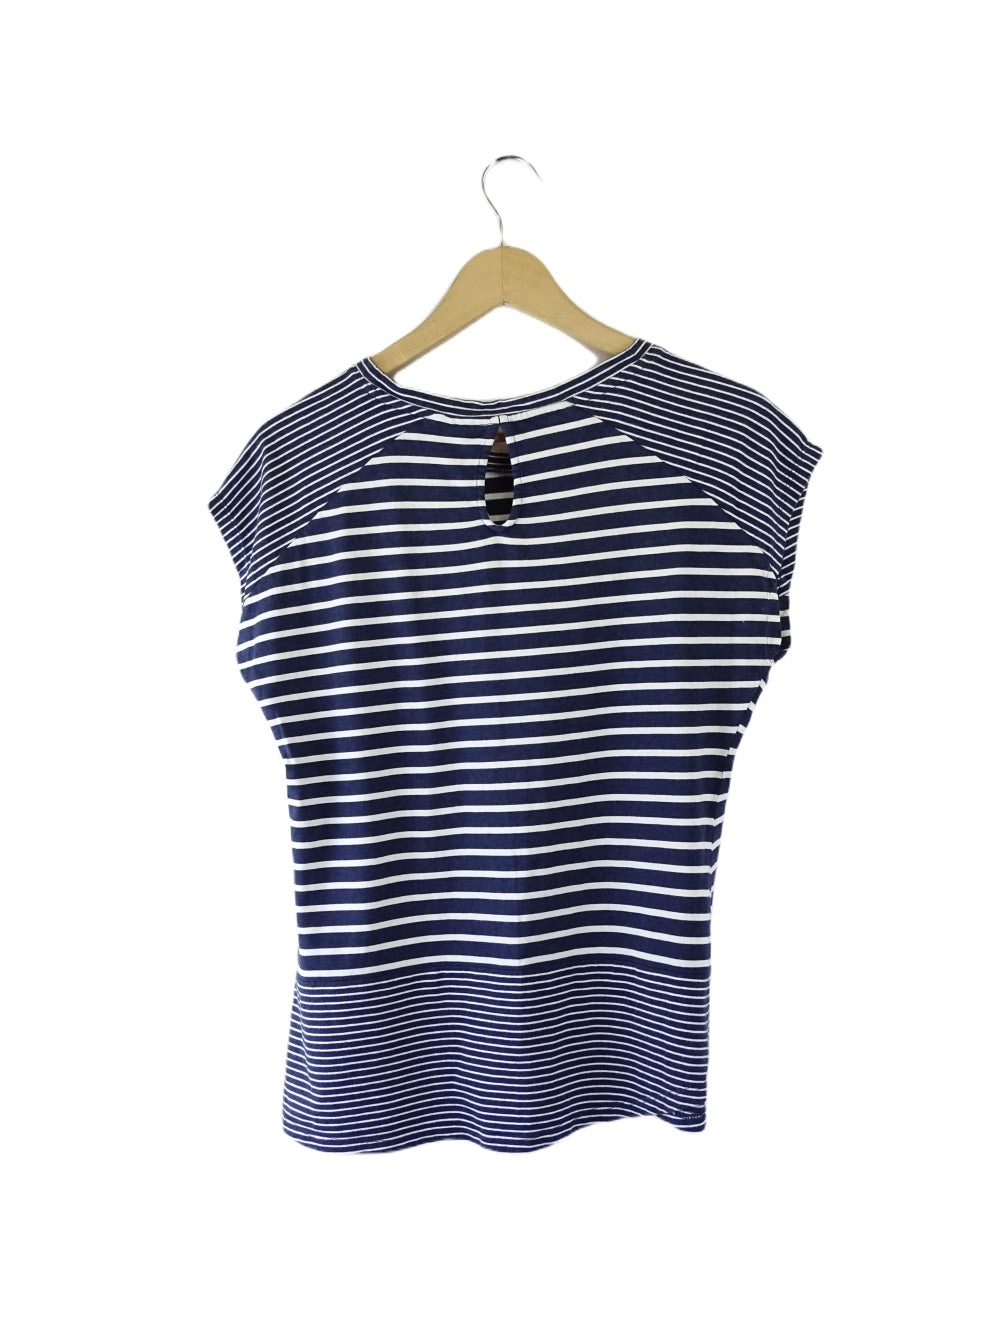 Jeanswest Blue And White Striped T-shirt S